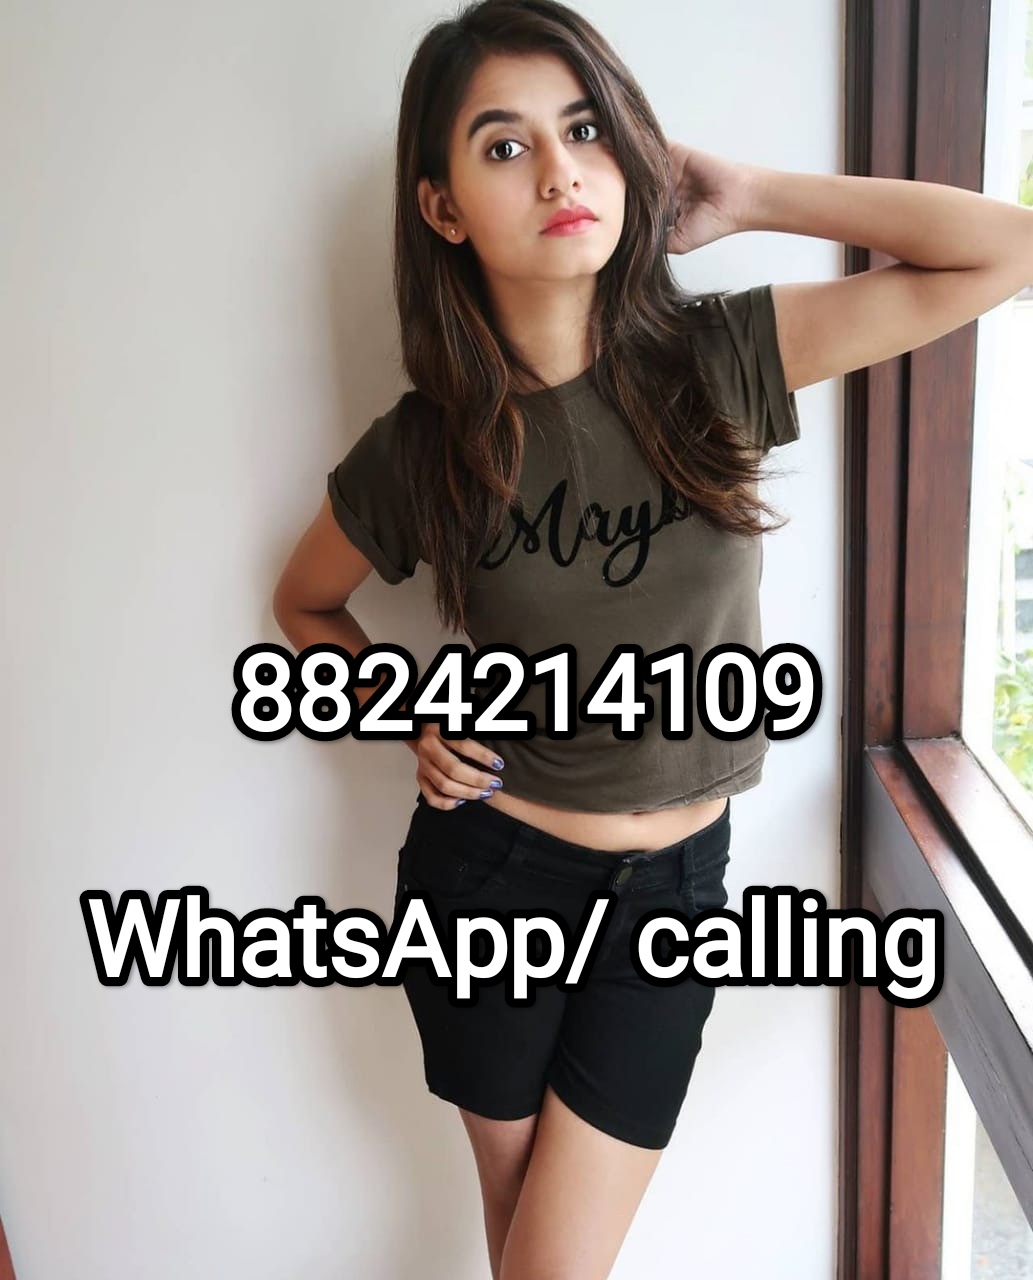 Coimbatore. High profile girls with safe and satisfaction service 